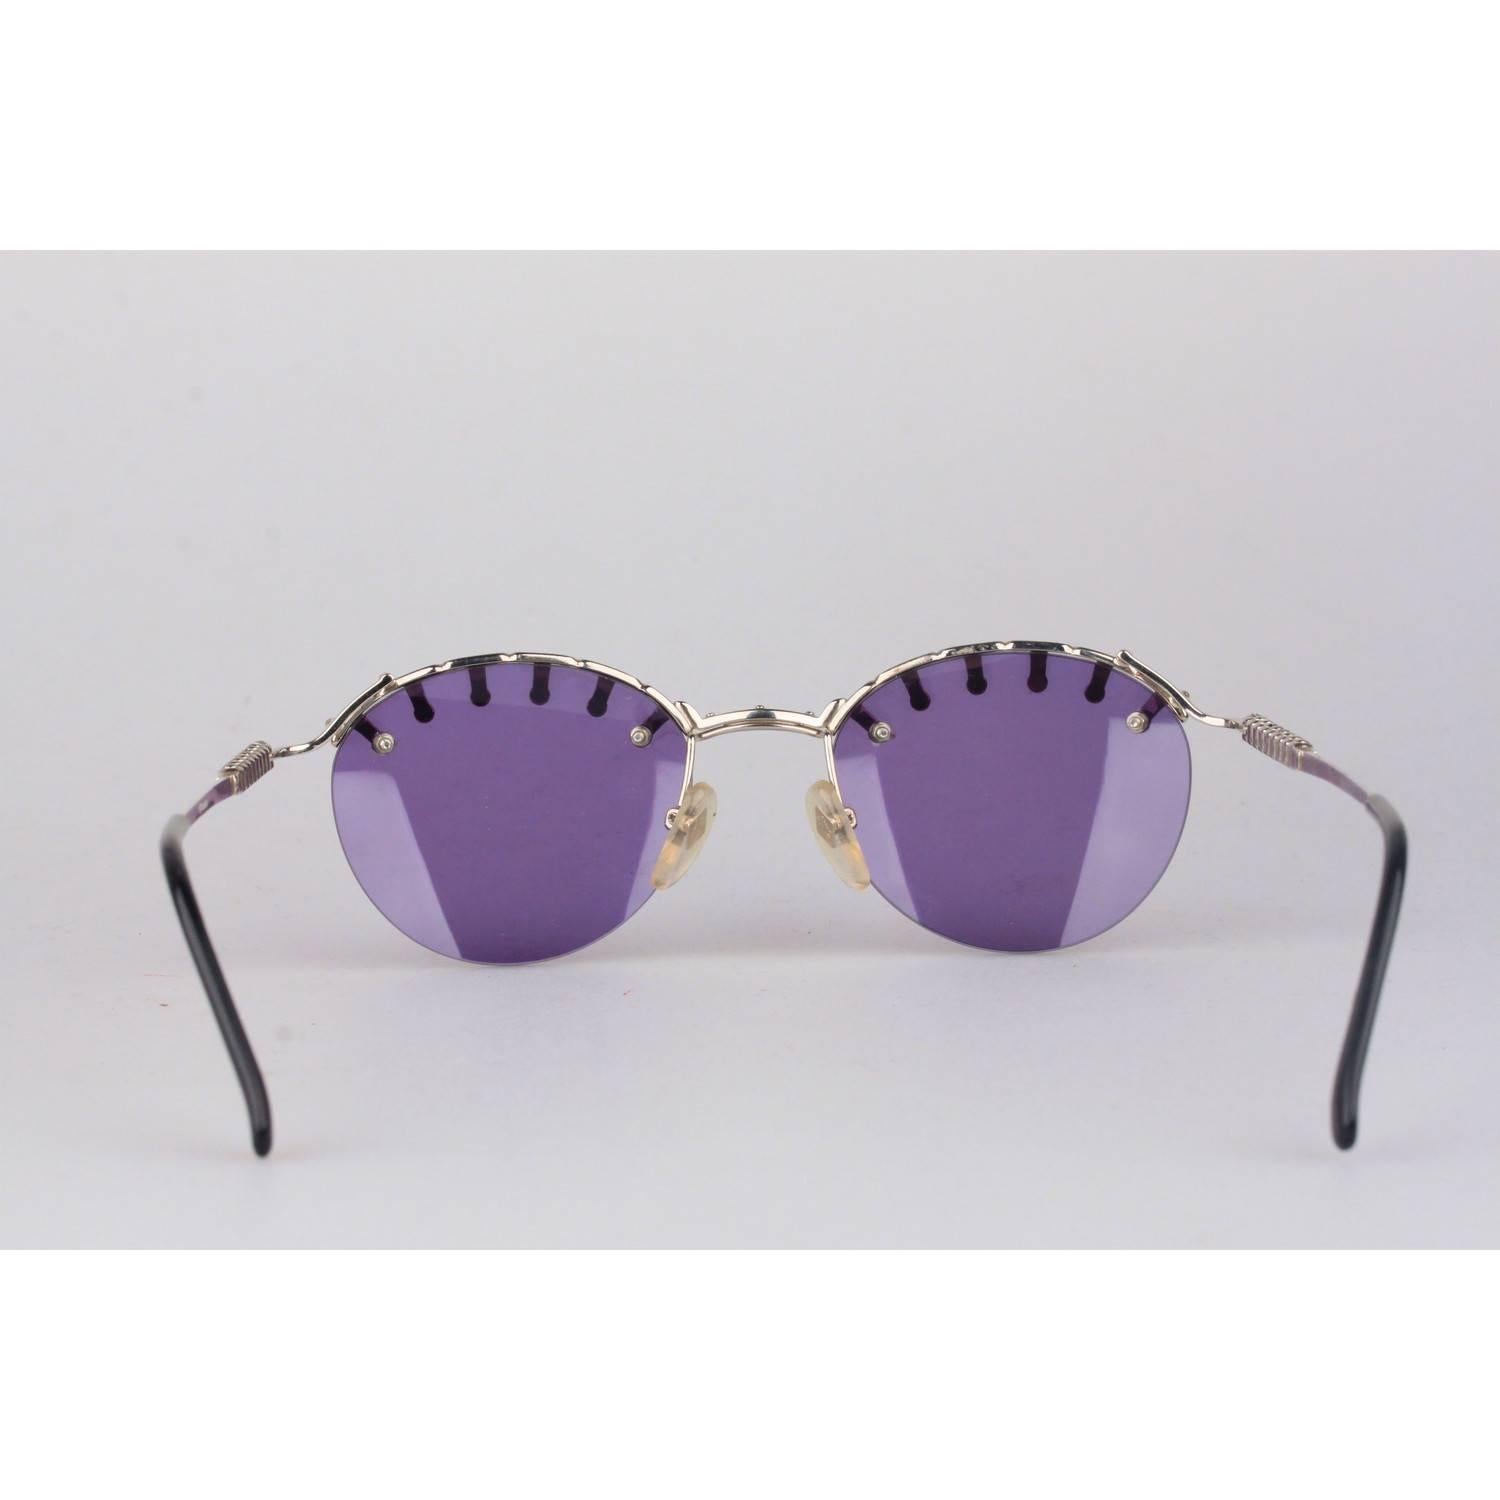 JEAN PAUL GAULTIER Vintage Silver Sunglasses 56-5103 New Old Stock 2